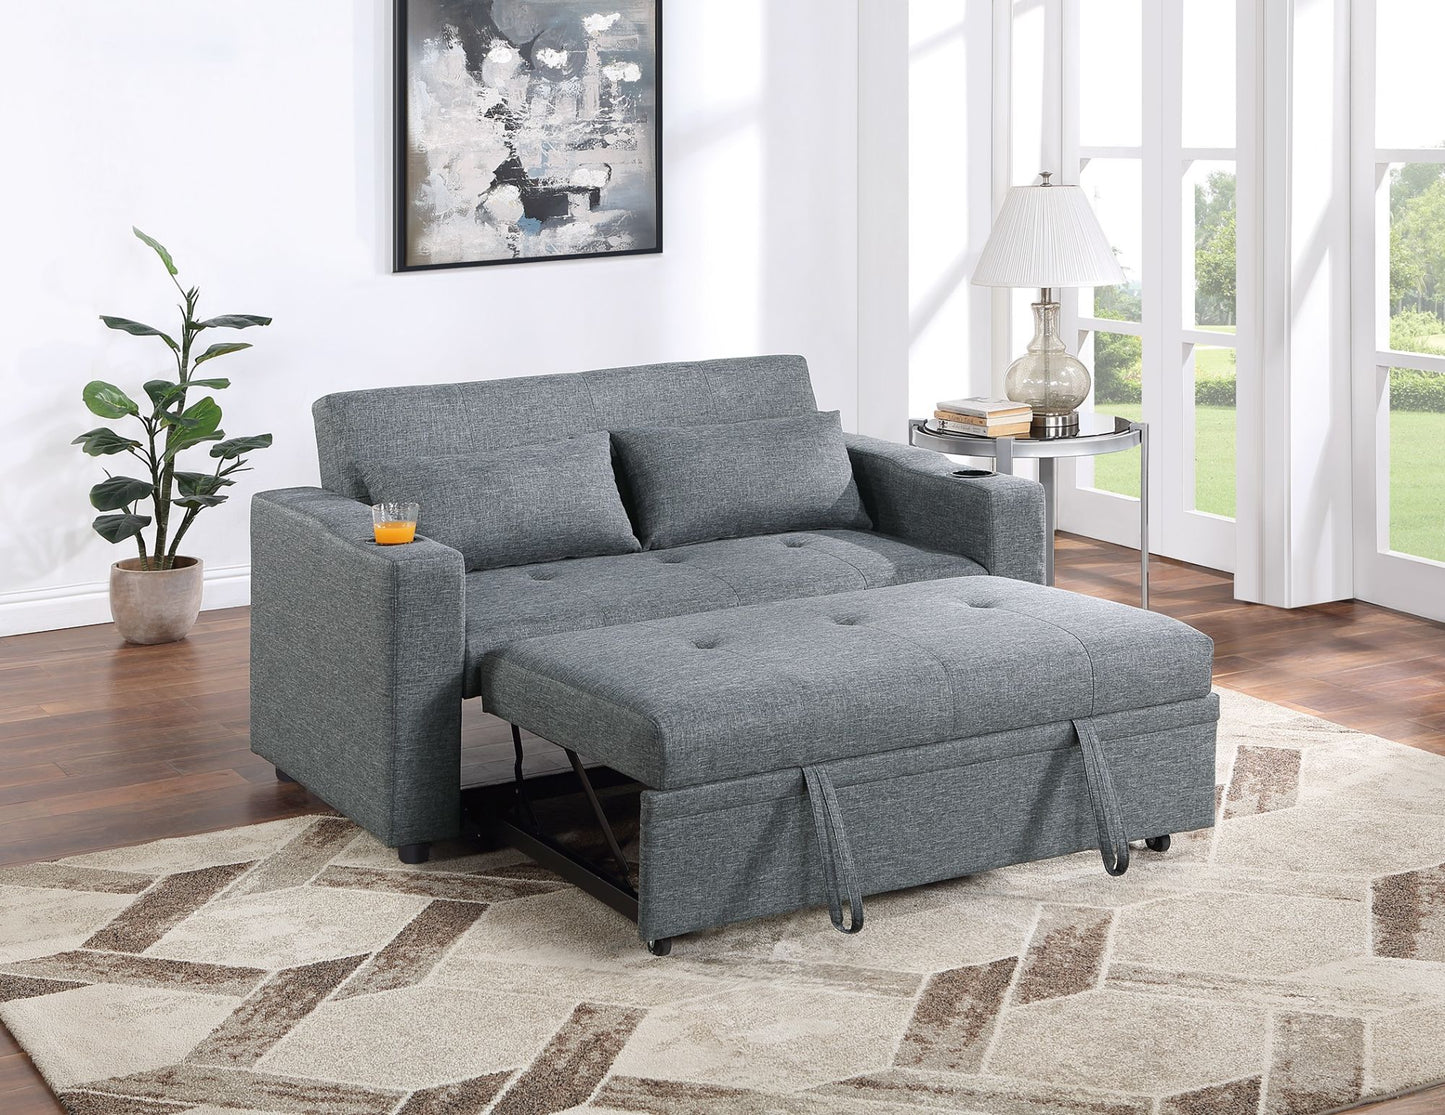 Contemporary Black Gray Sleeper Sofa Pillows Plush Tufted Seat 1pc Convertible Sofa w Cup Holder Polyfiber Couch